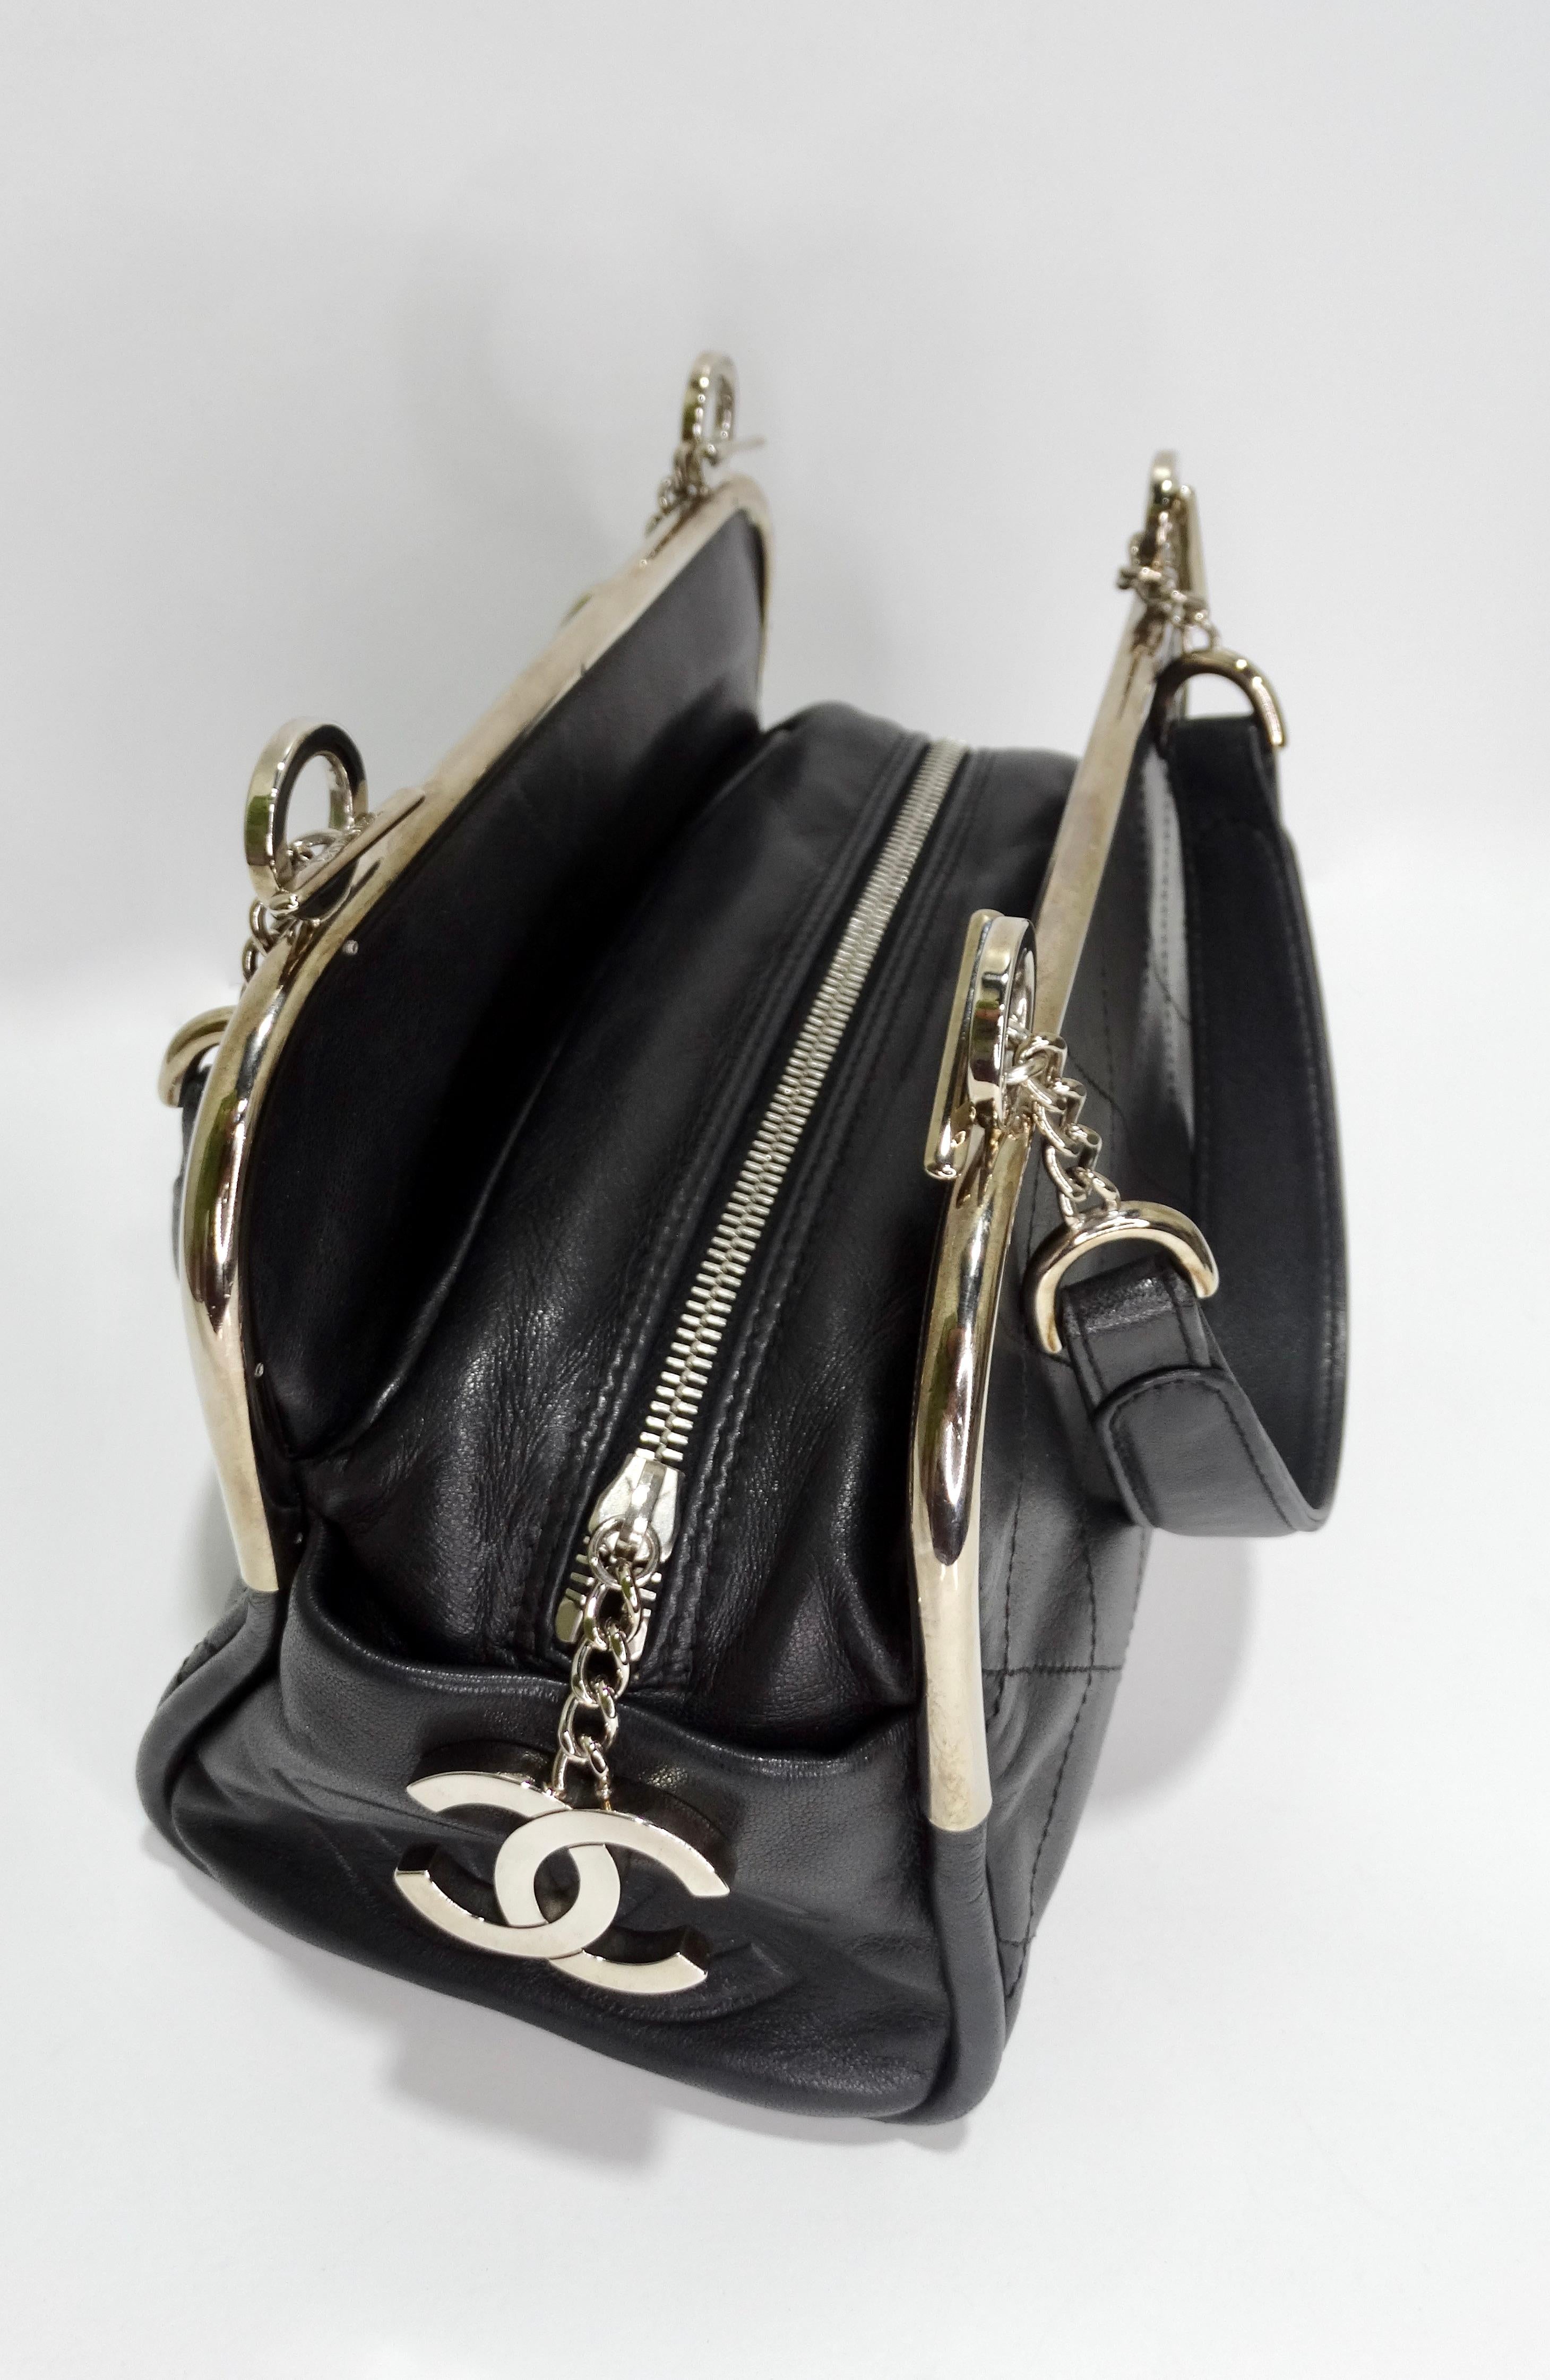 Chanel Black Quilted Leather Top Handle Bag 2